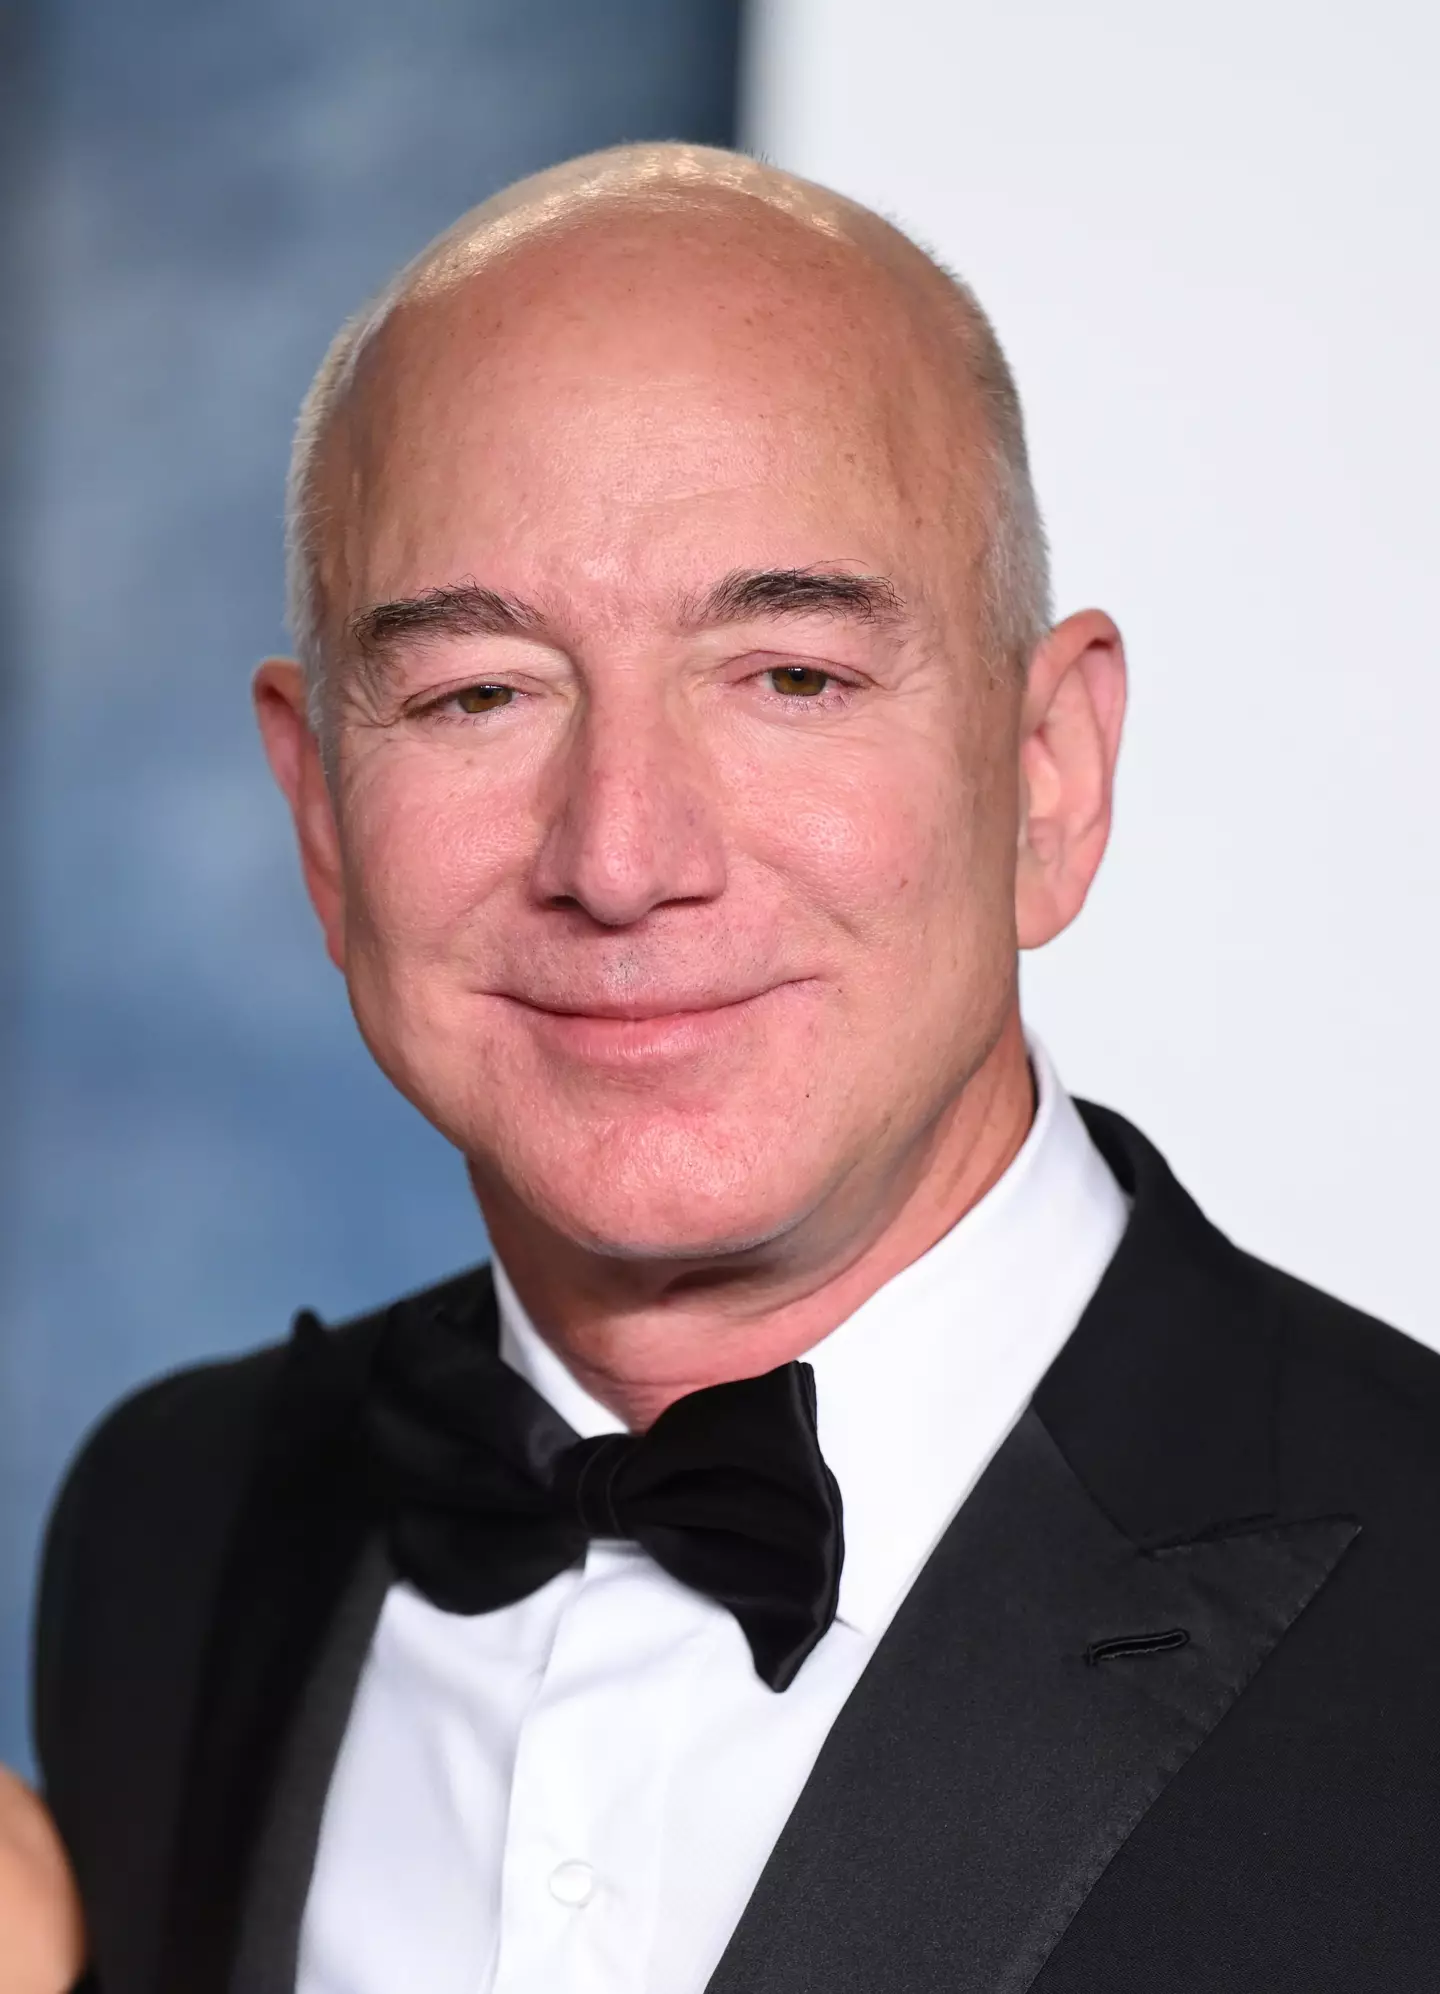 Jeff Bezos spoke about how it feels to be weightless.